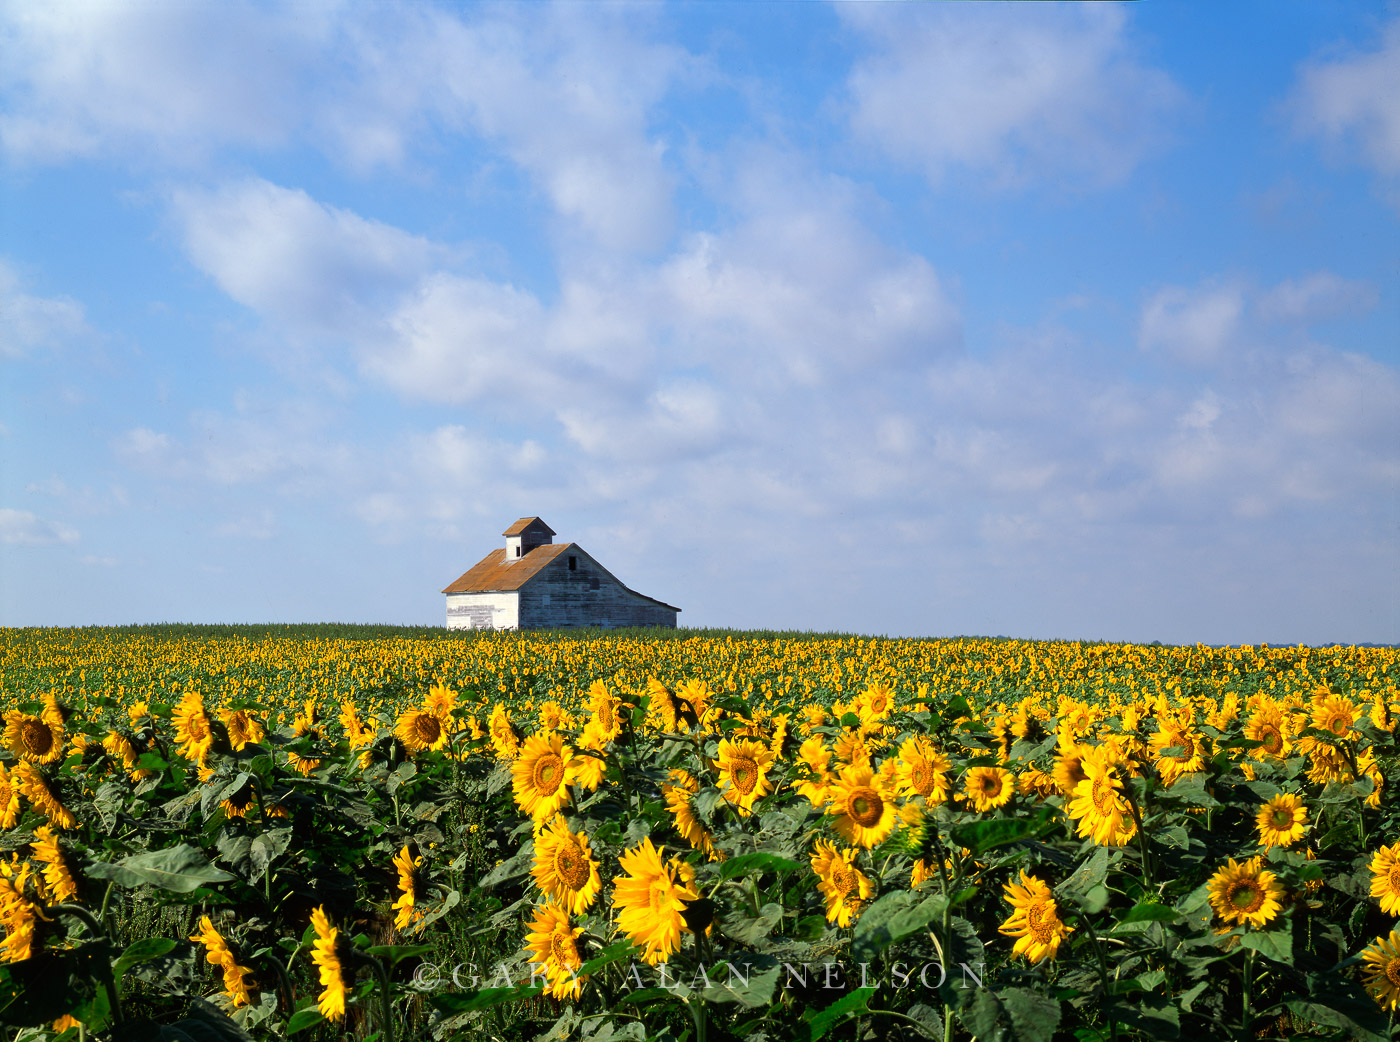 ND-93-14-FM SUNFLOWERS AND BARN, RED RIVER VALLEY, NORTH DAKOTA